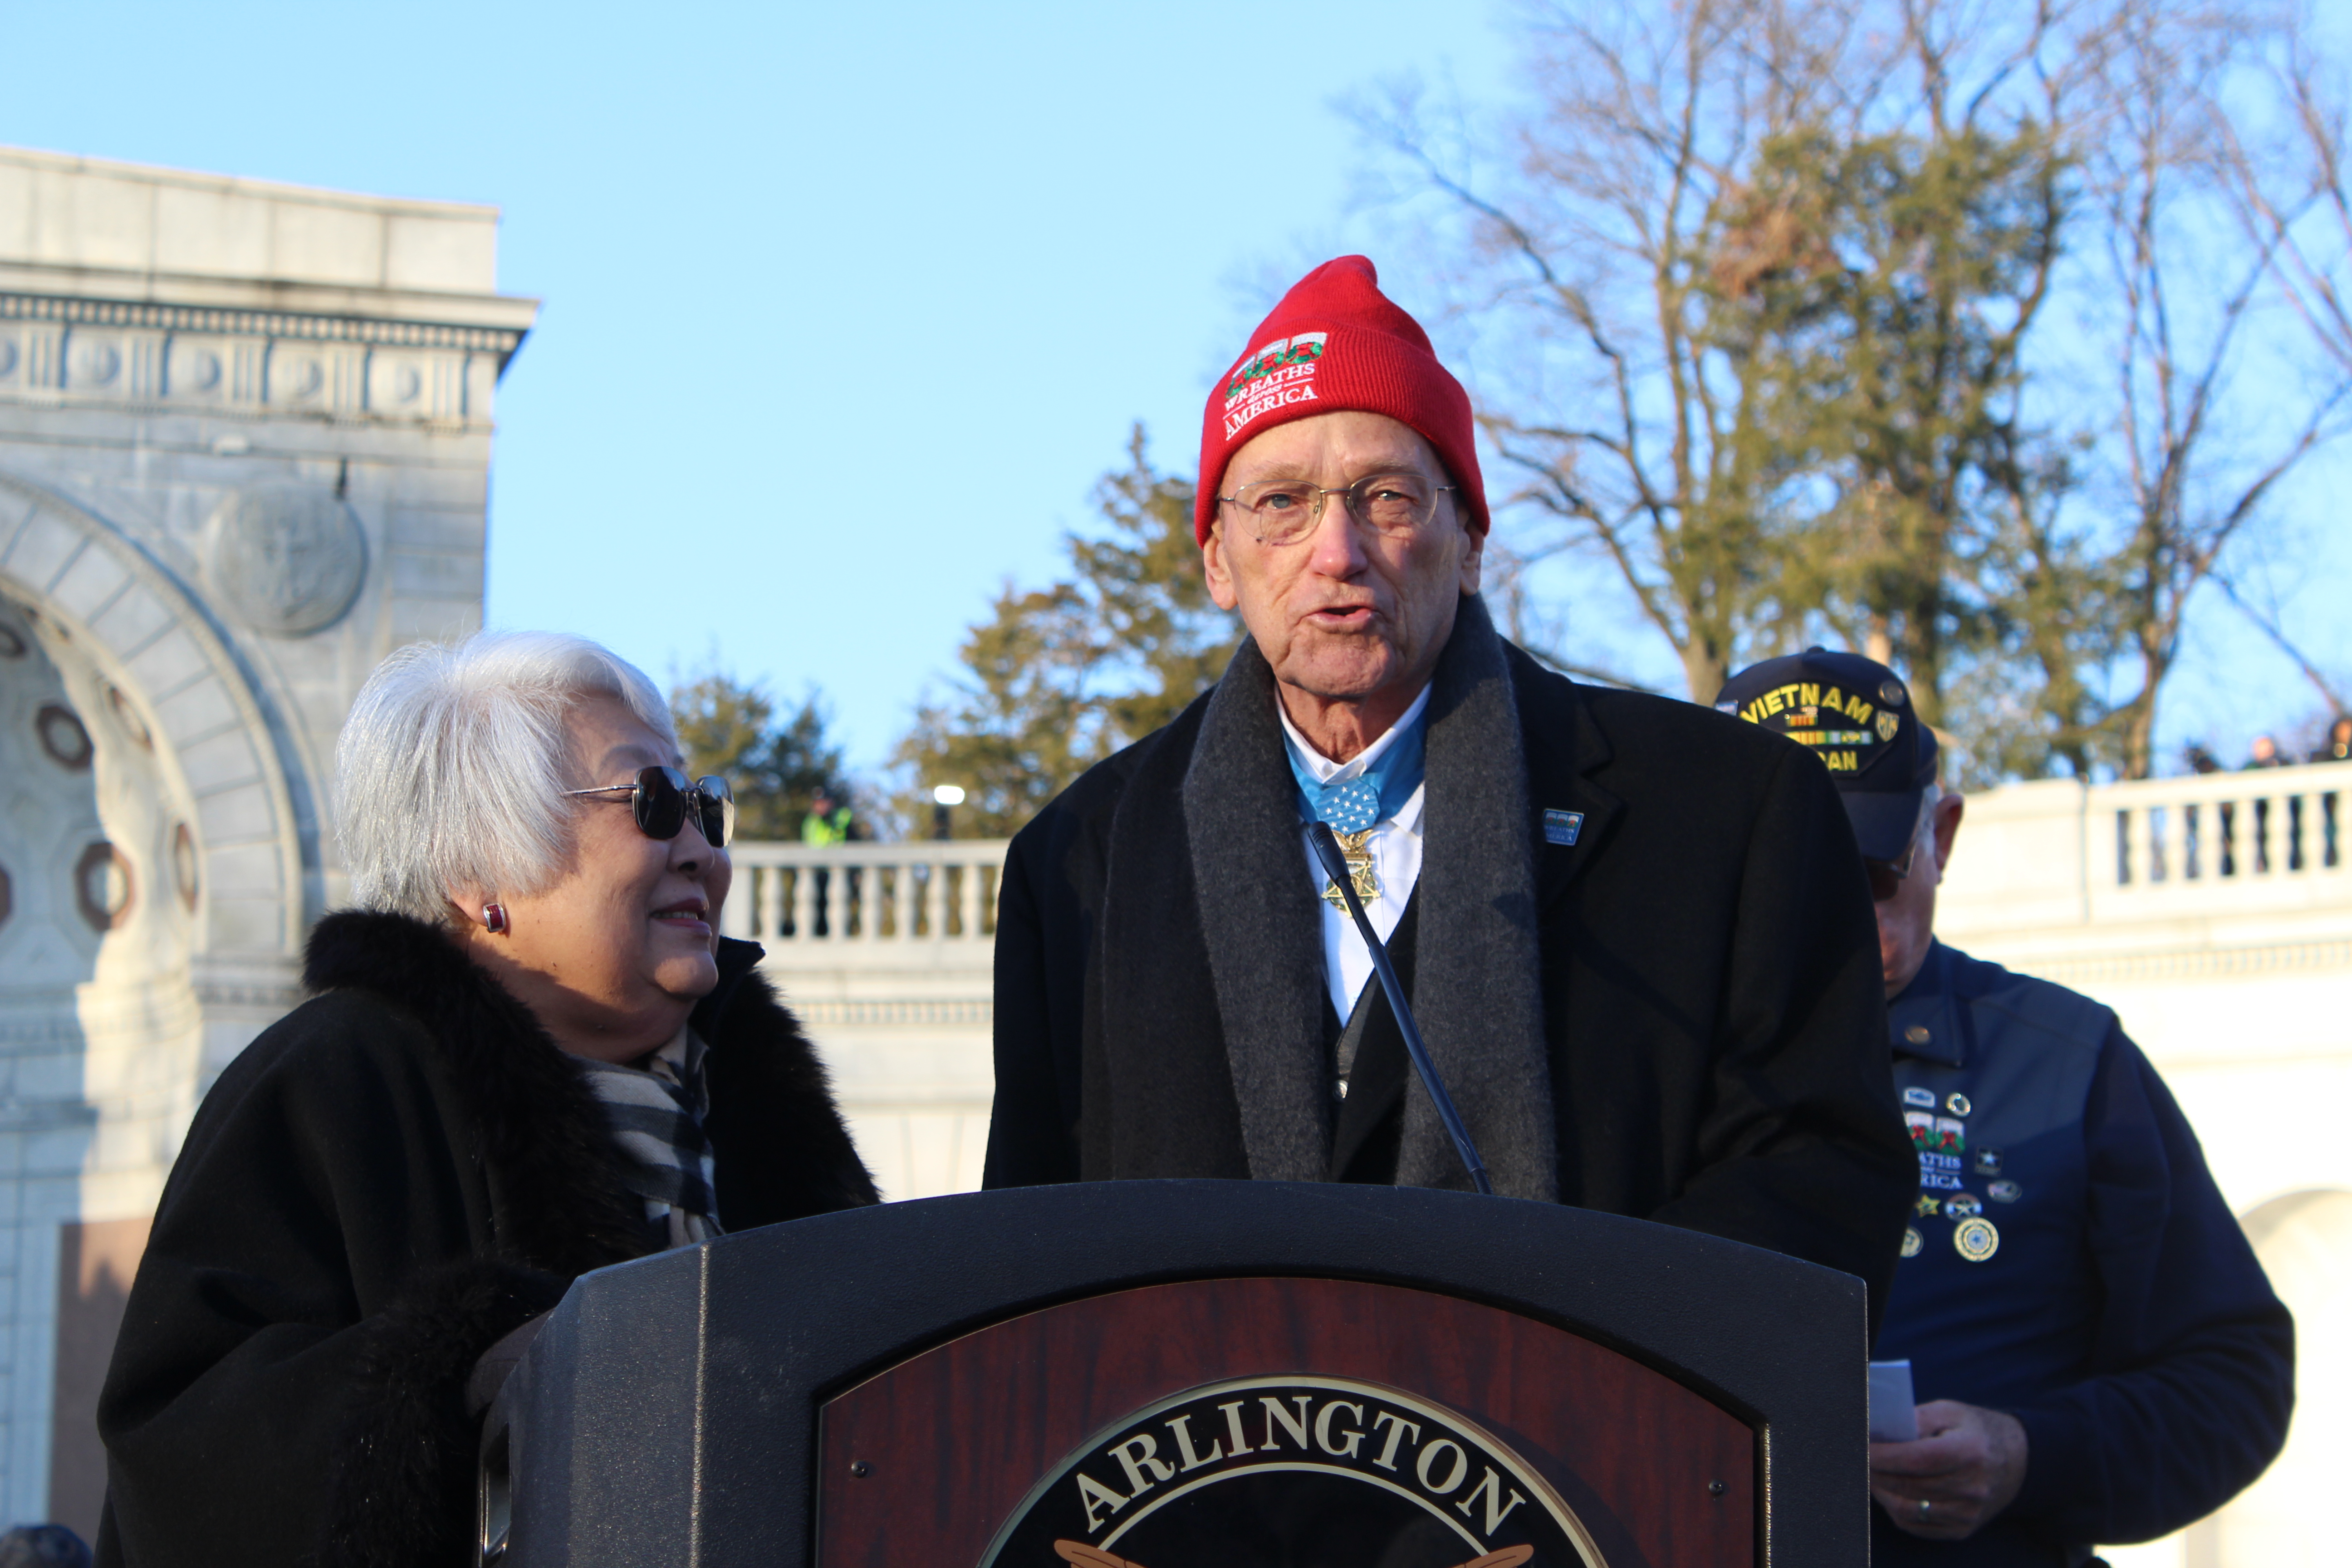 Medal of Honor Recipient Col. Roger Donolon Addresses Opening Ceremony Of Wreaths Across America Dec 16, 2017 (Julia Nista/The Daily Caller)